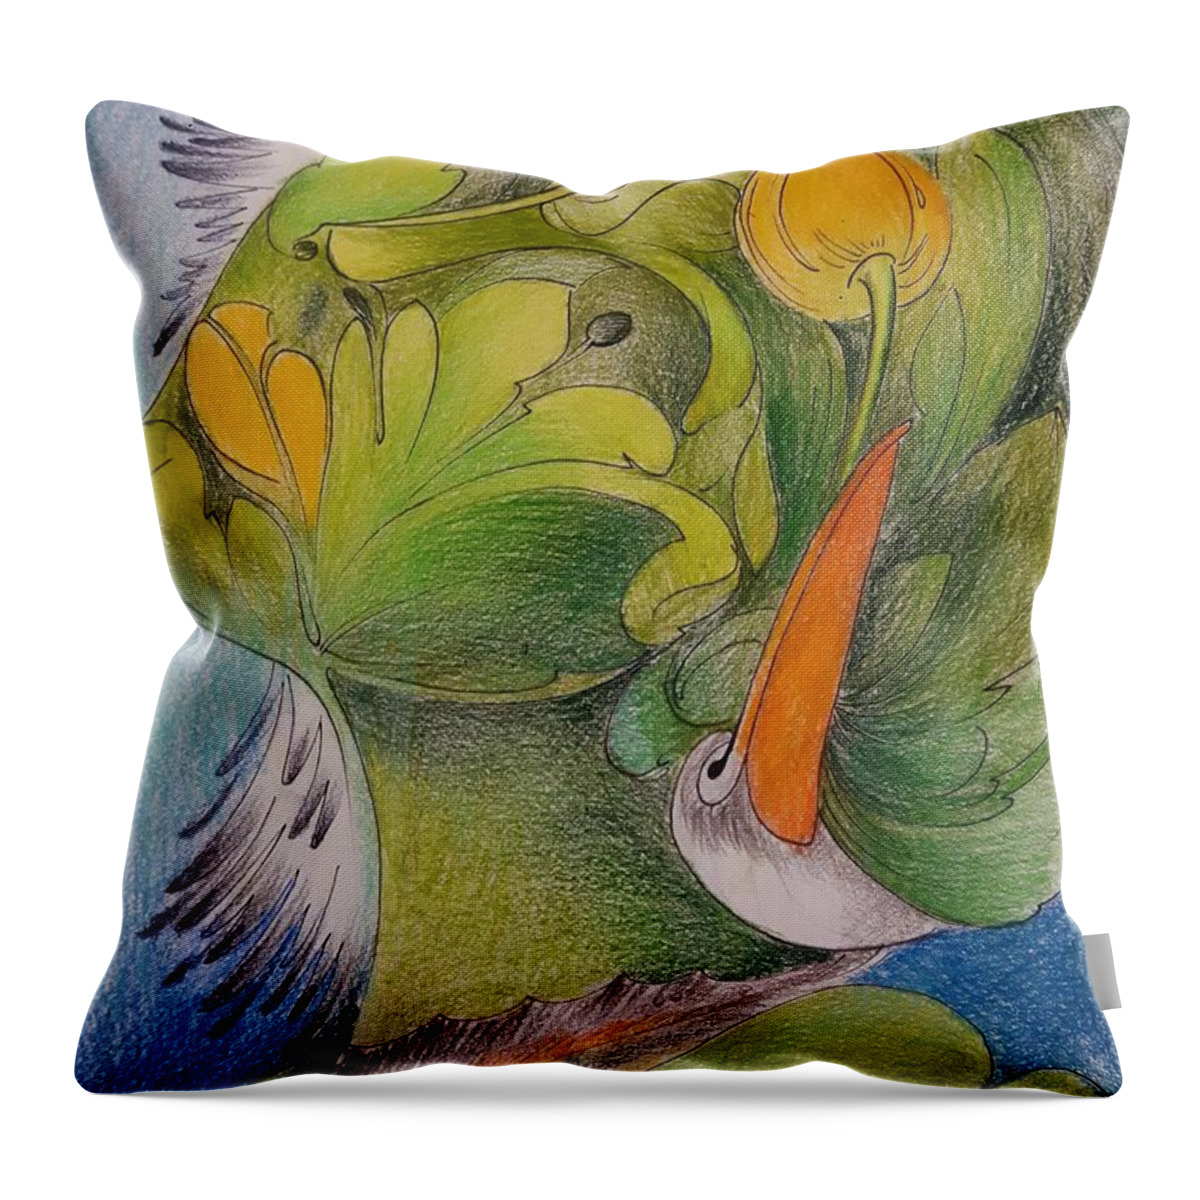 Portrait Throw Pillow featuring the painting Delta-Strength Trought Fragility-Danube Delta 4 by Vali Irina Ciobanu